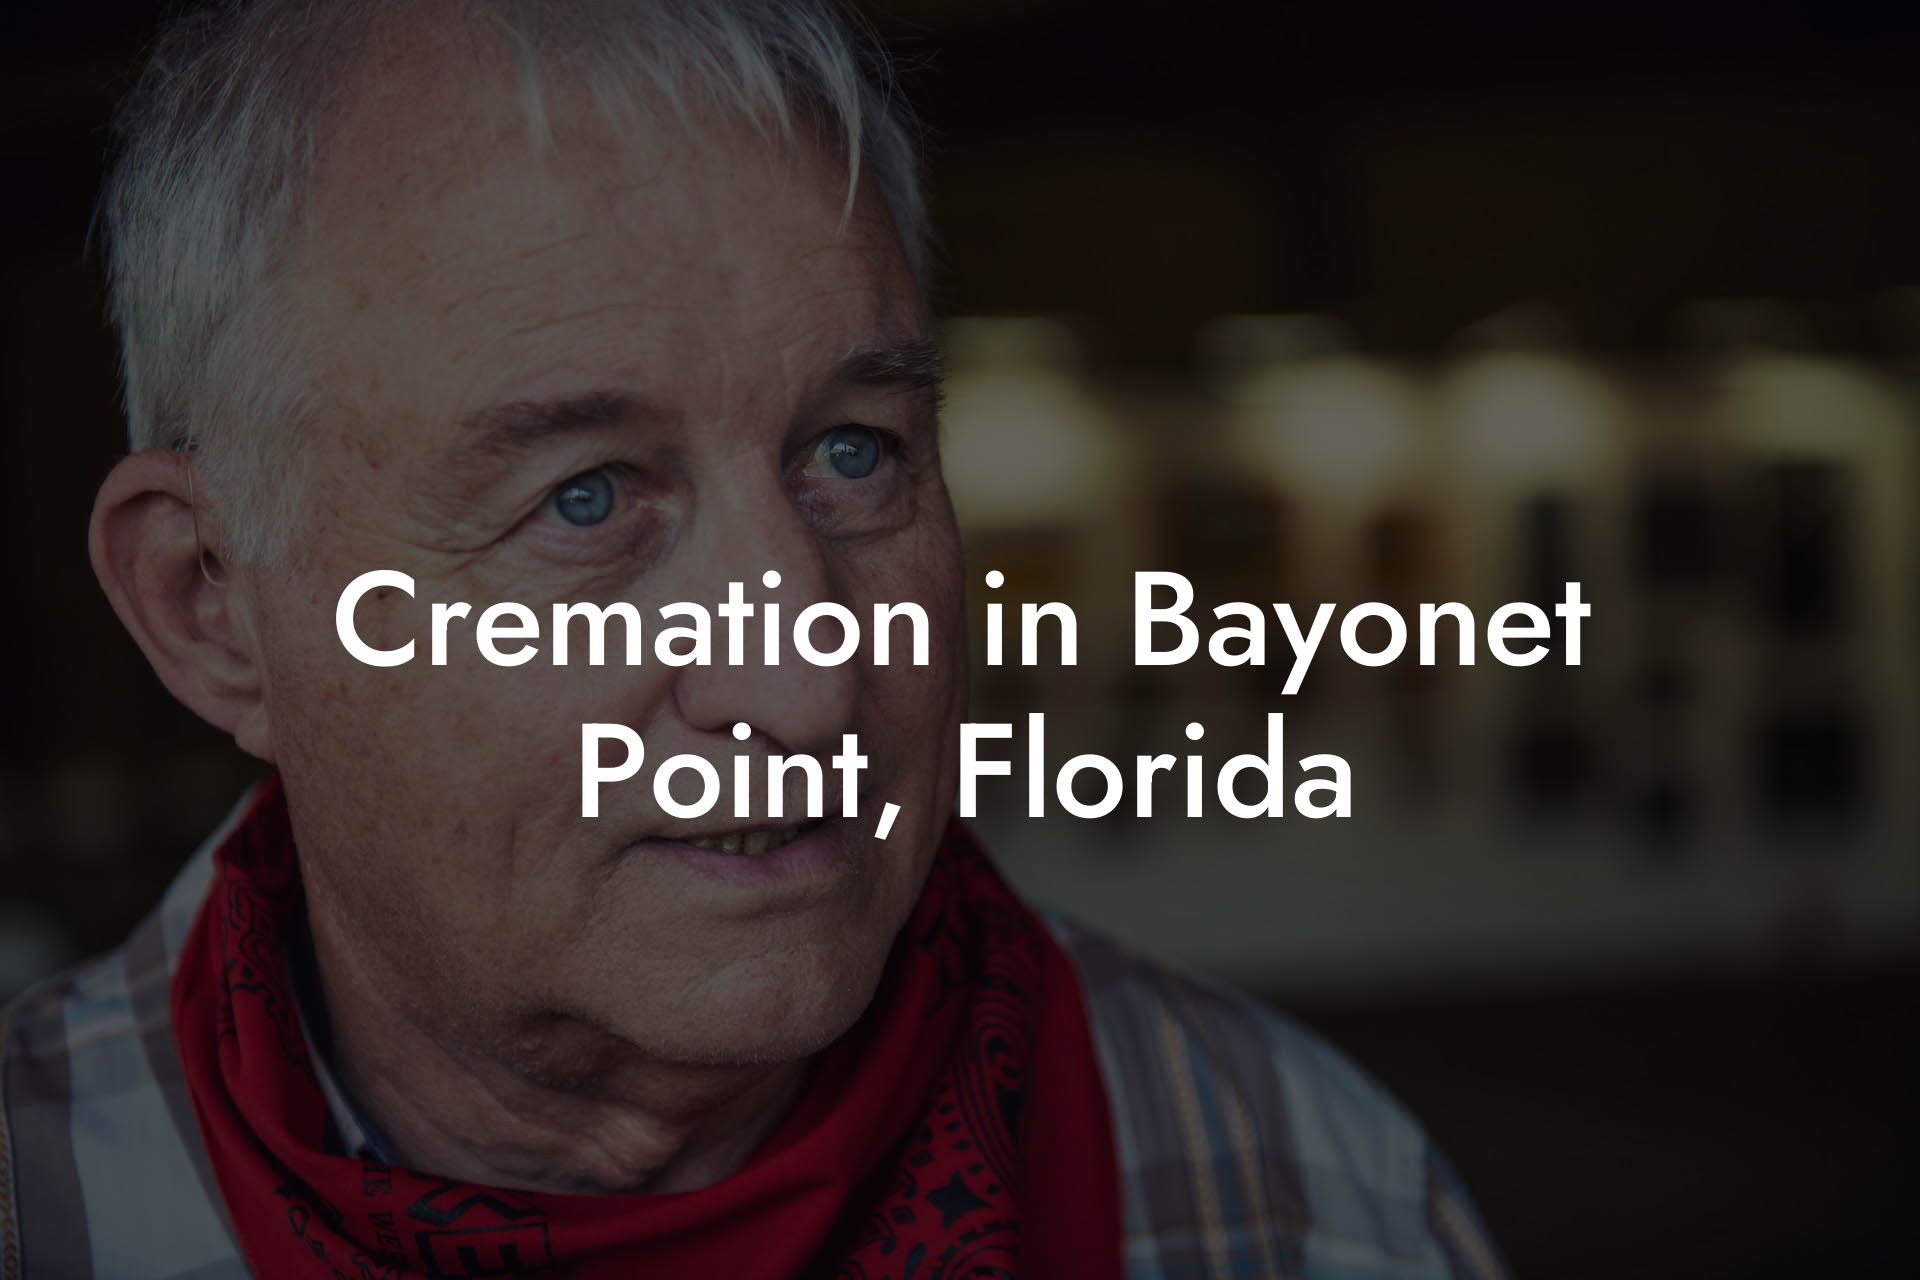 Cremation in Bayonet Point, Florida